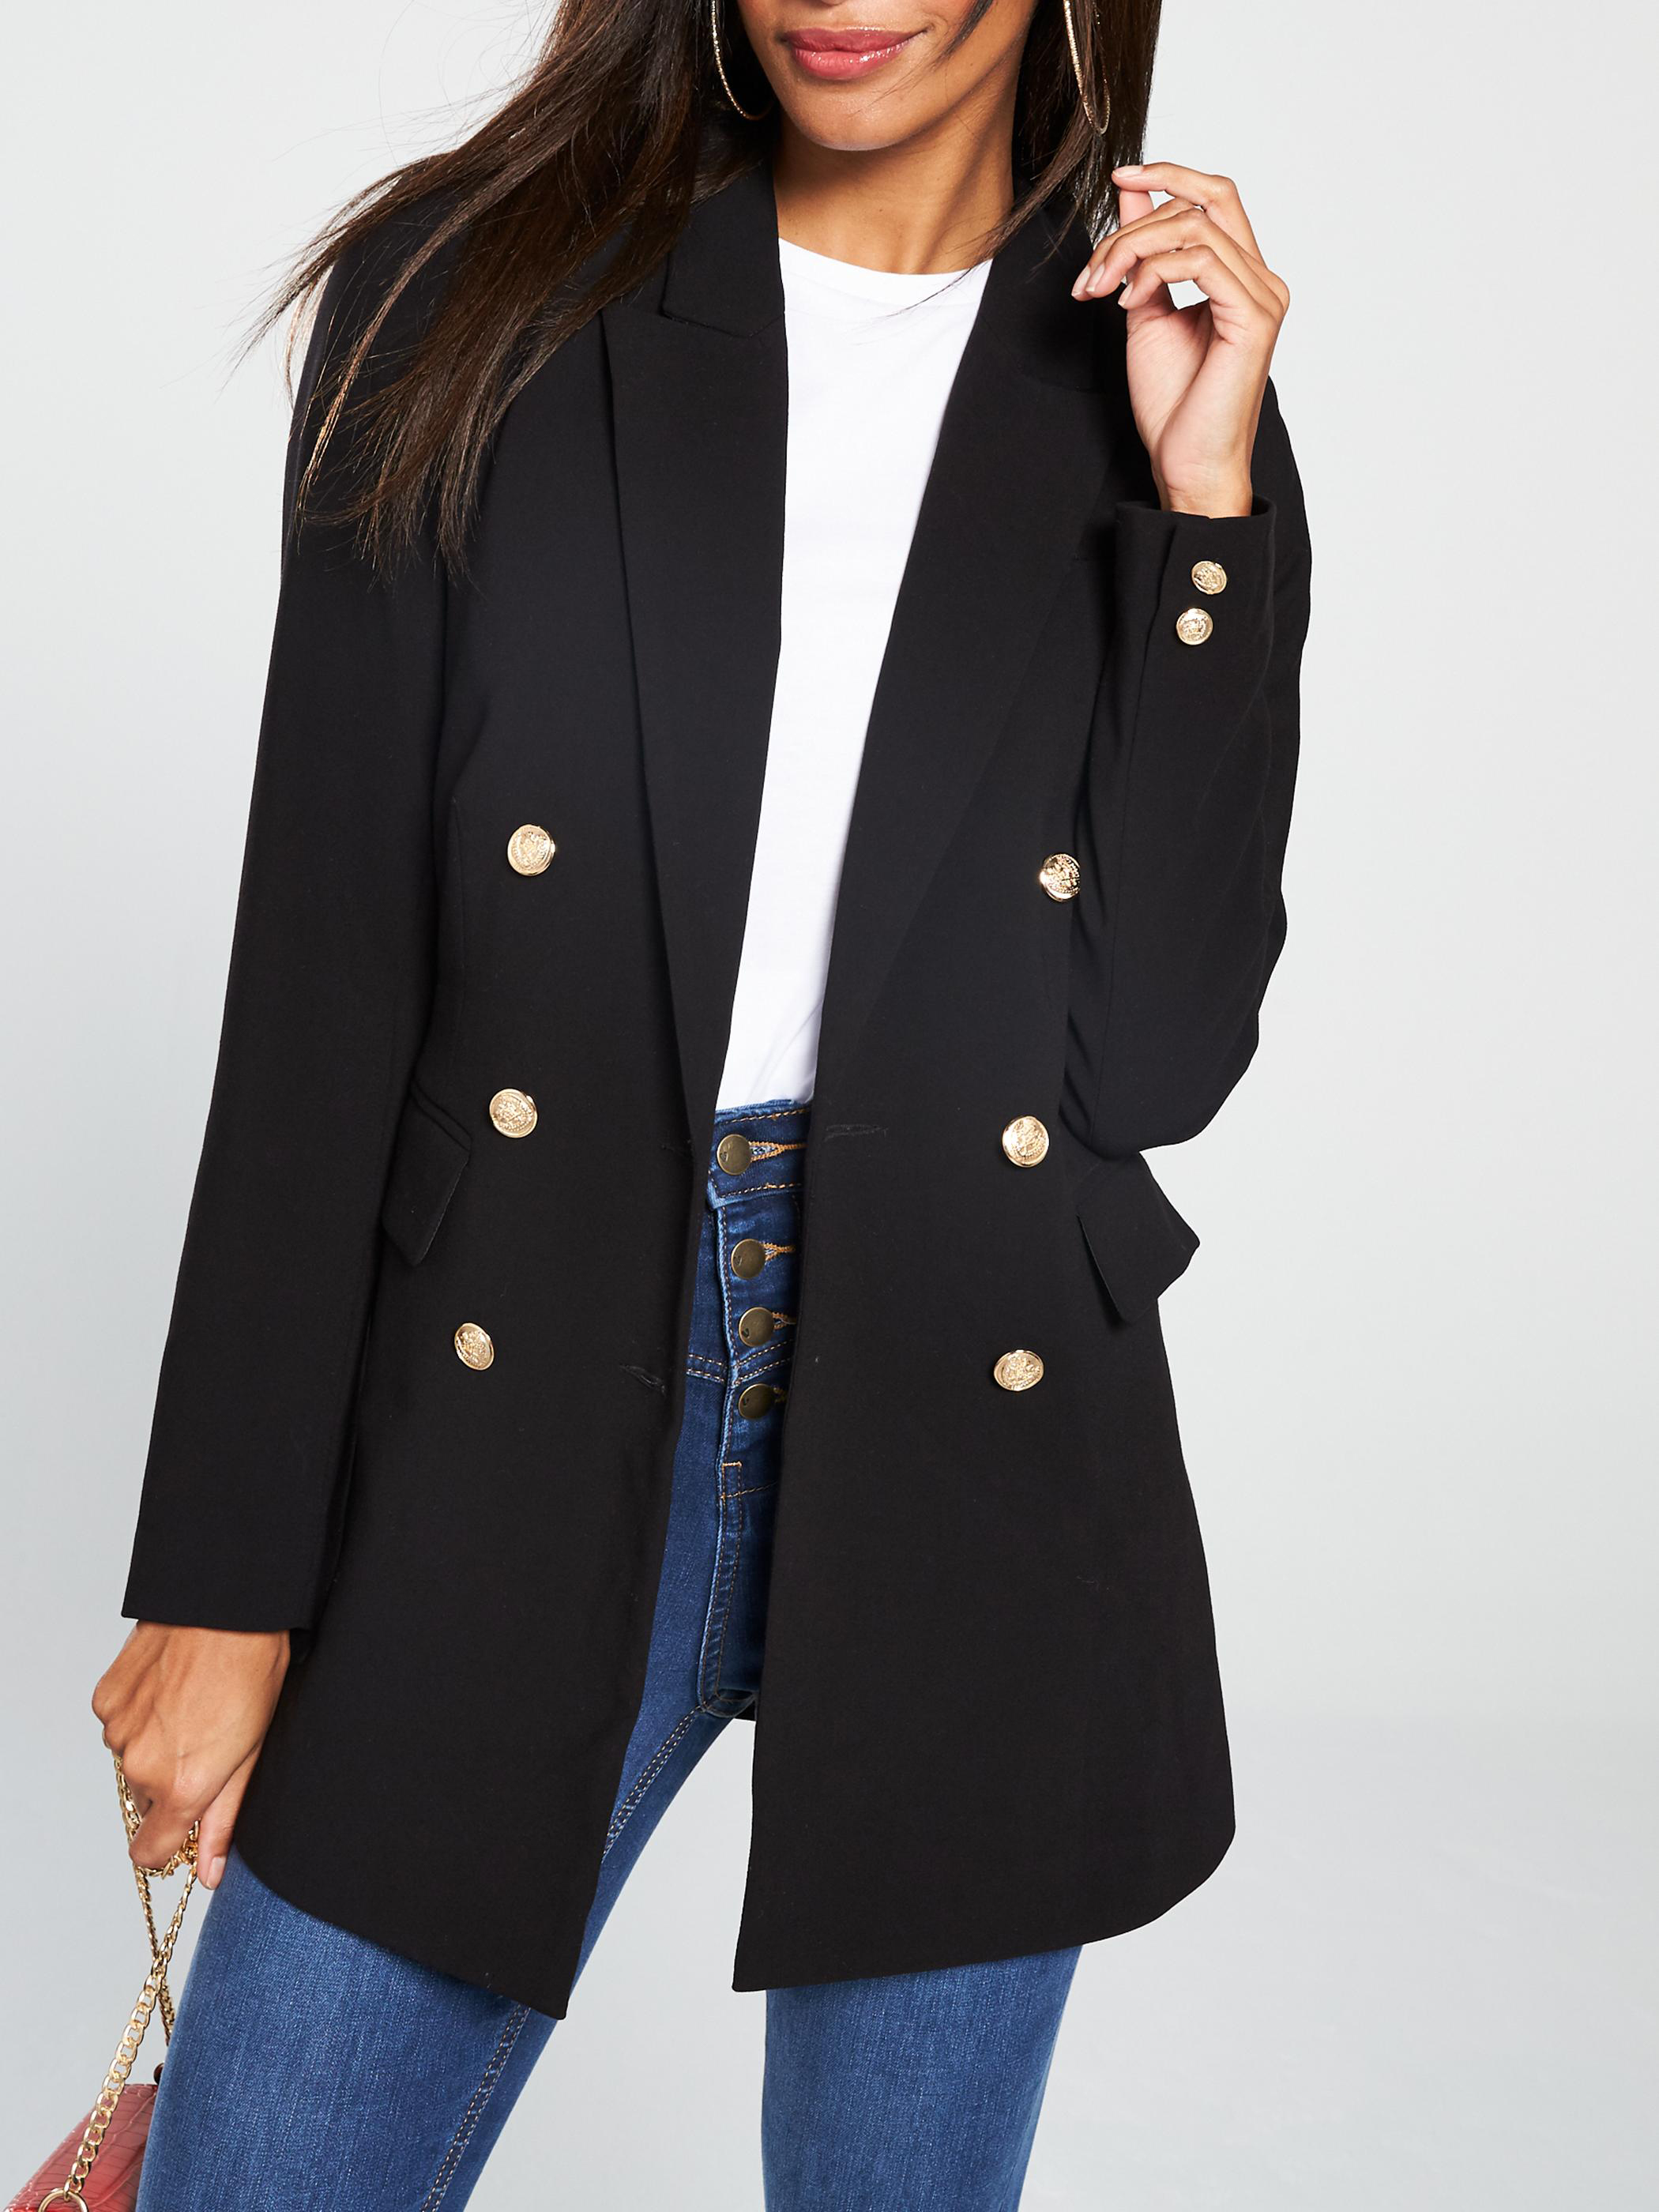 V by Very Longline Military Jacket in Black, £42